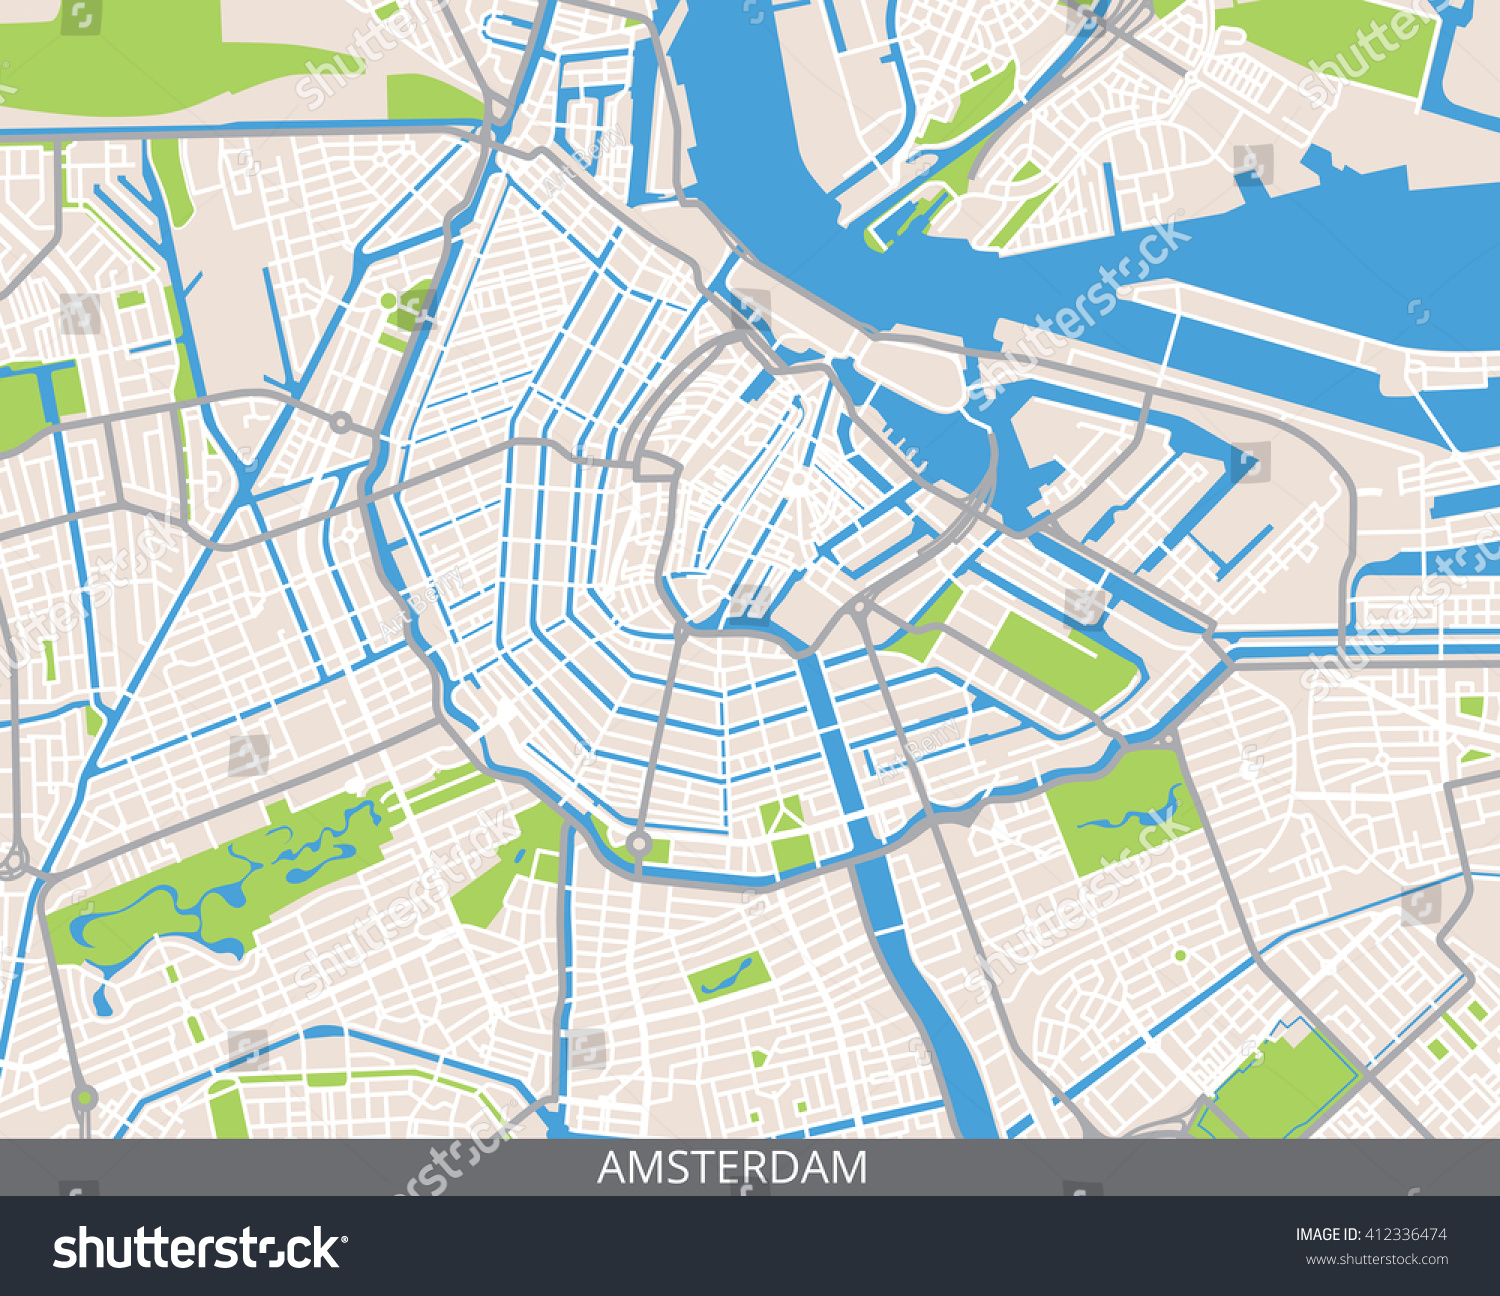 Where is Amsterdam located?